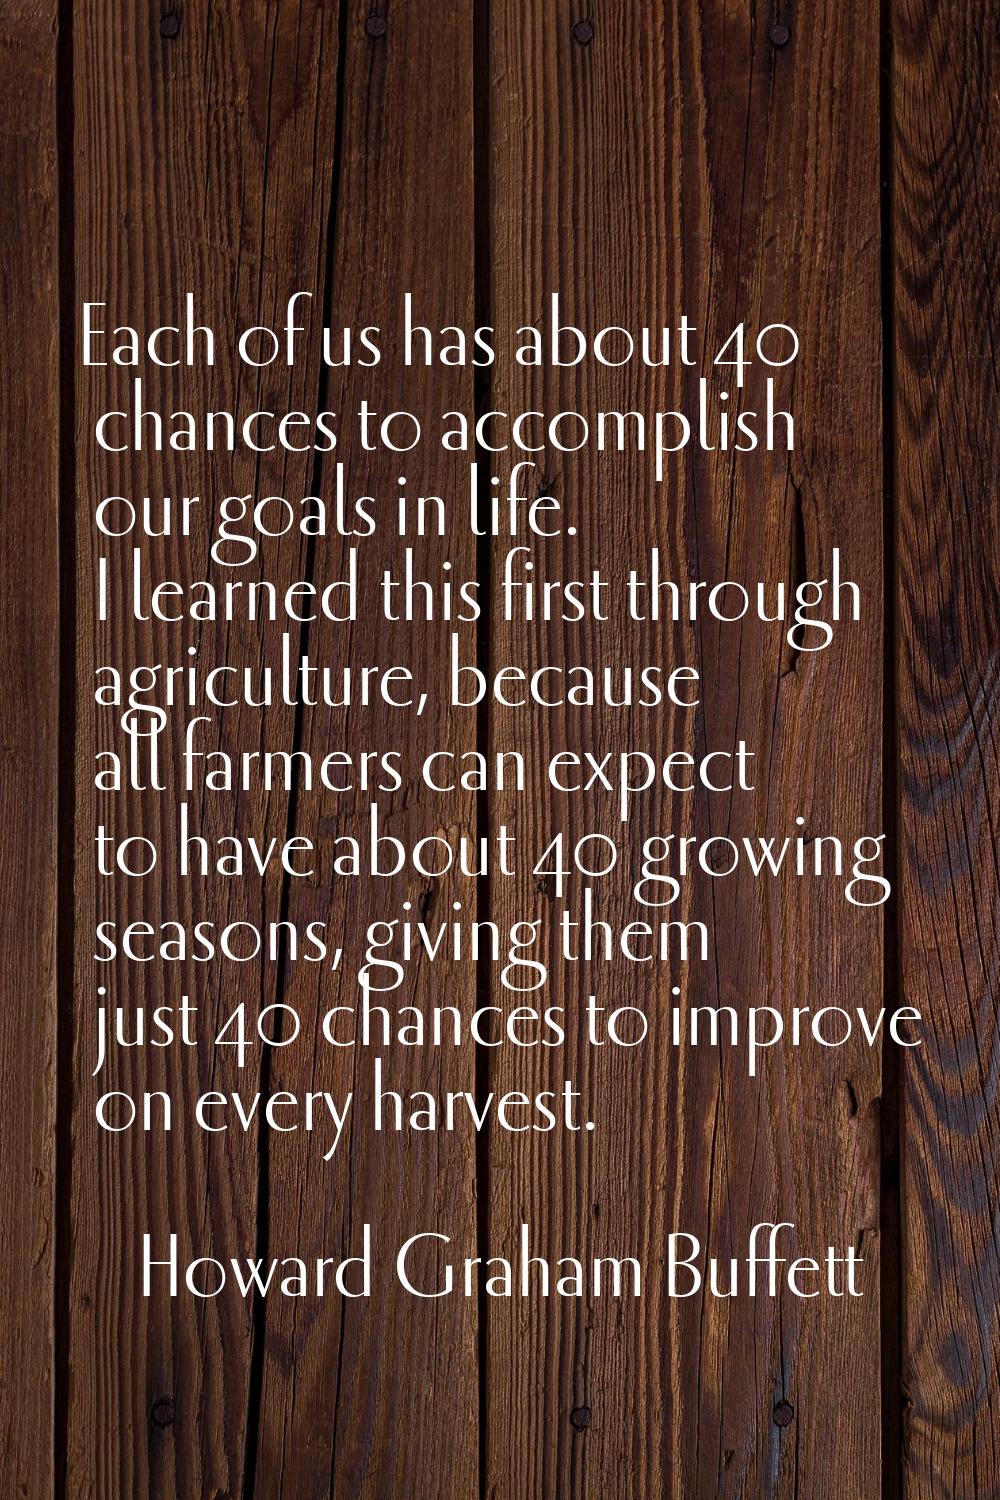 Each of us has about 40 chances to accomplish our goals in life. I learned this first through agric